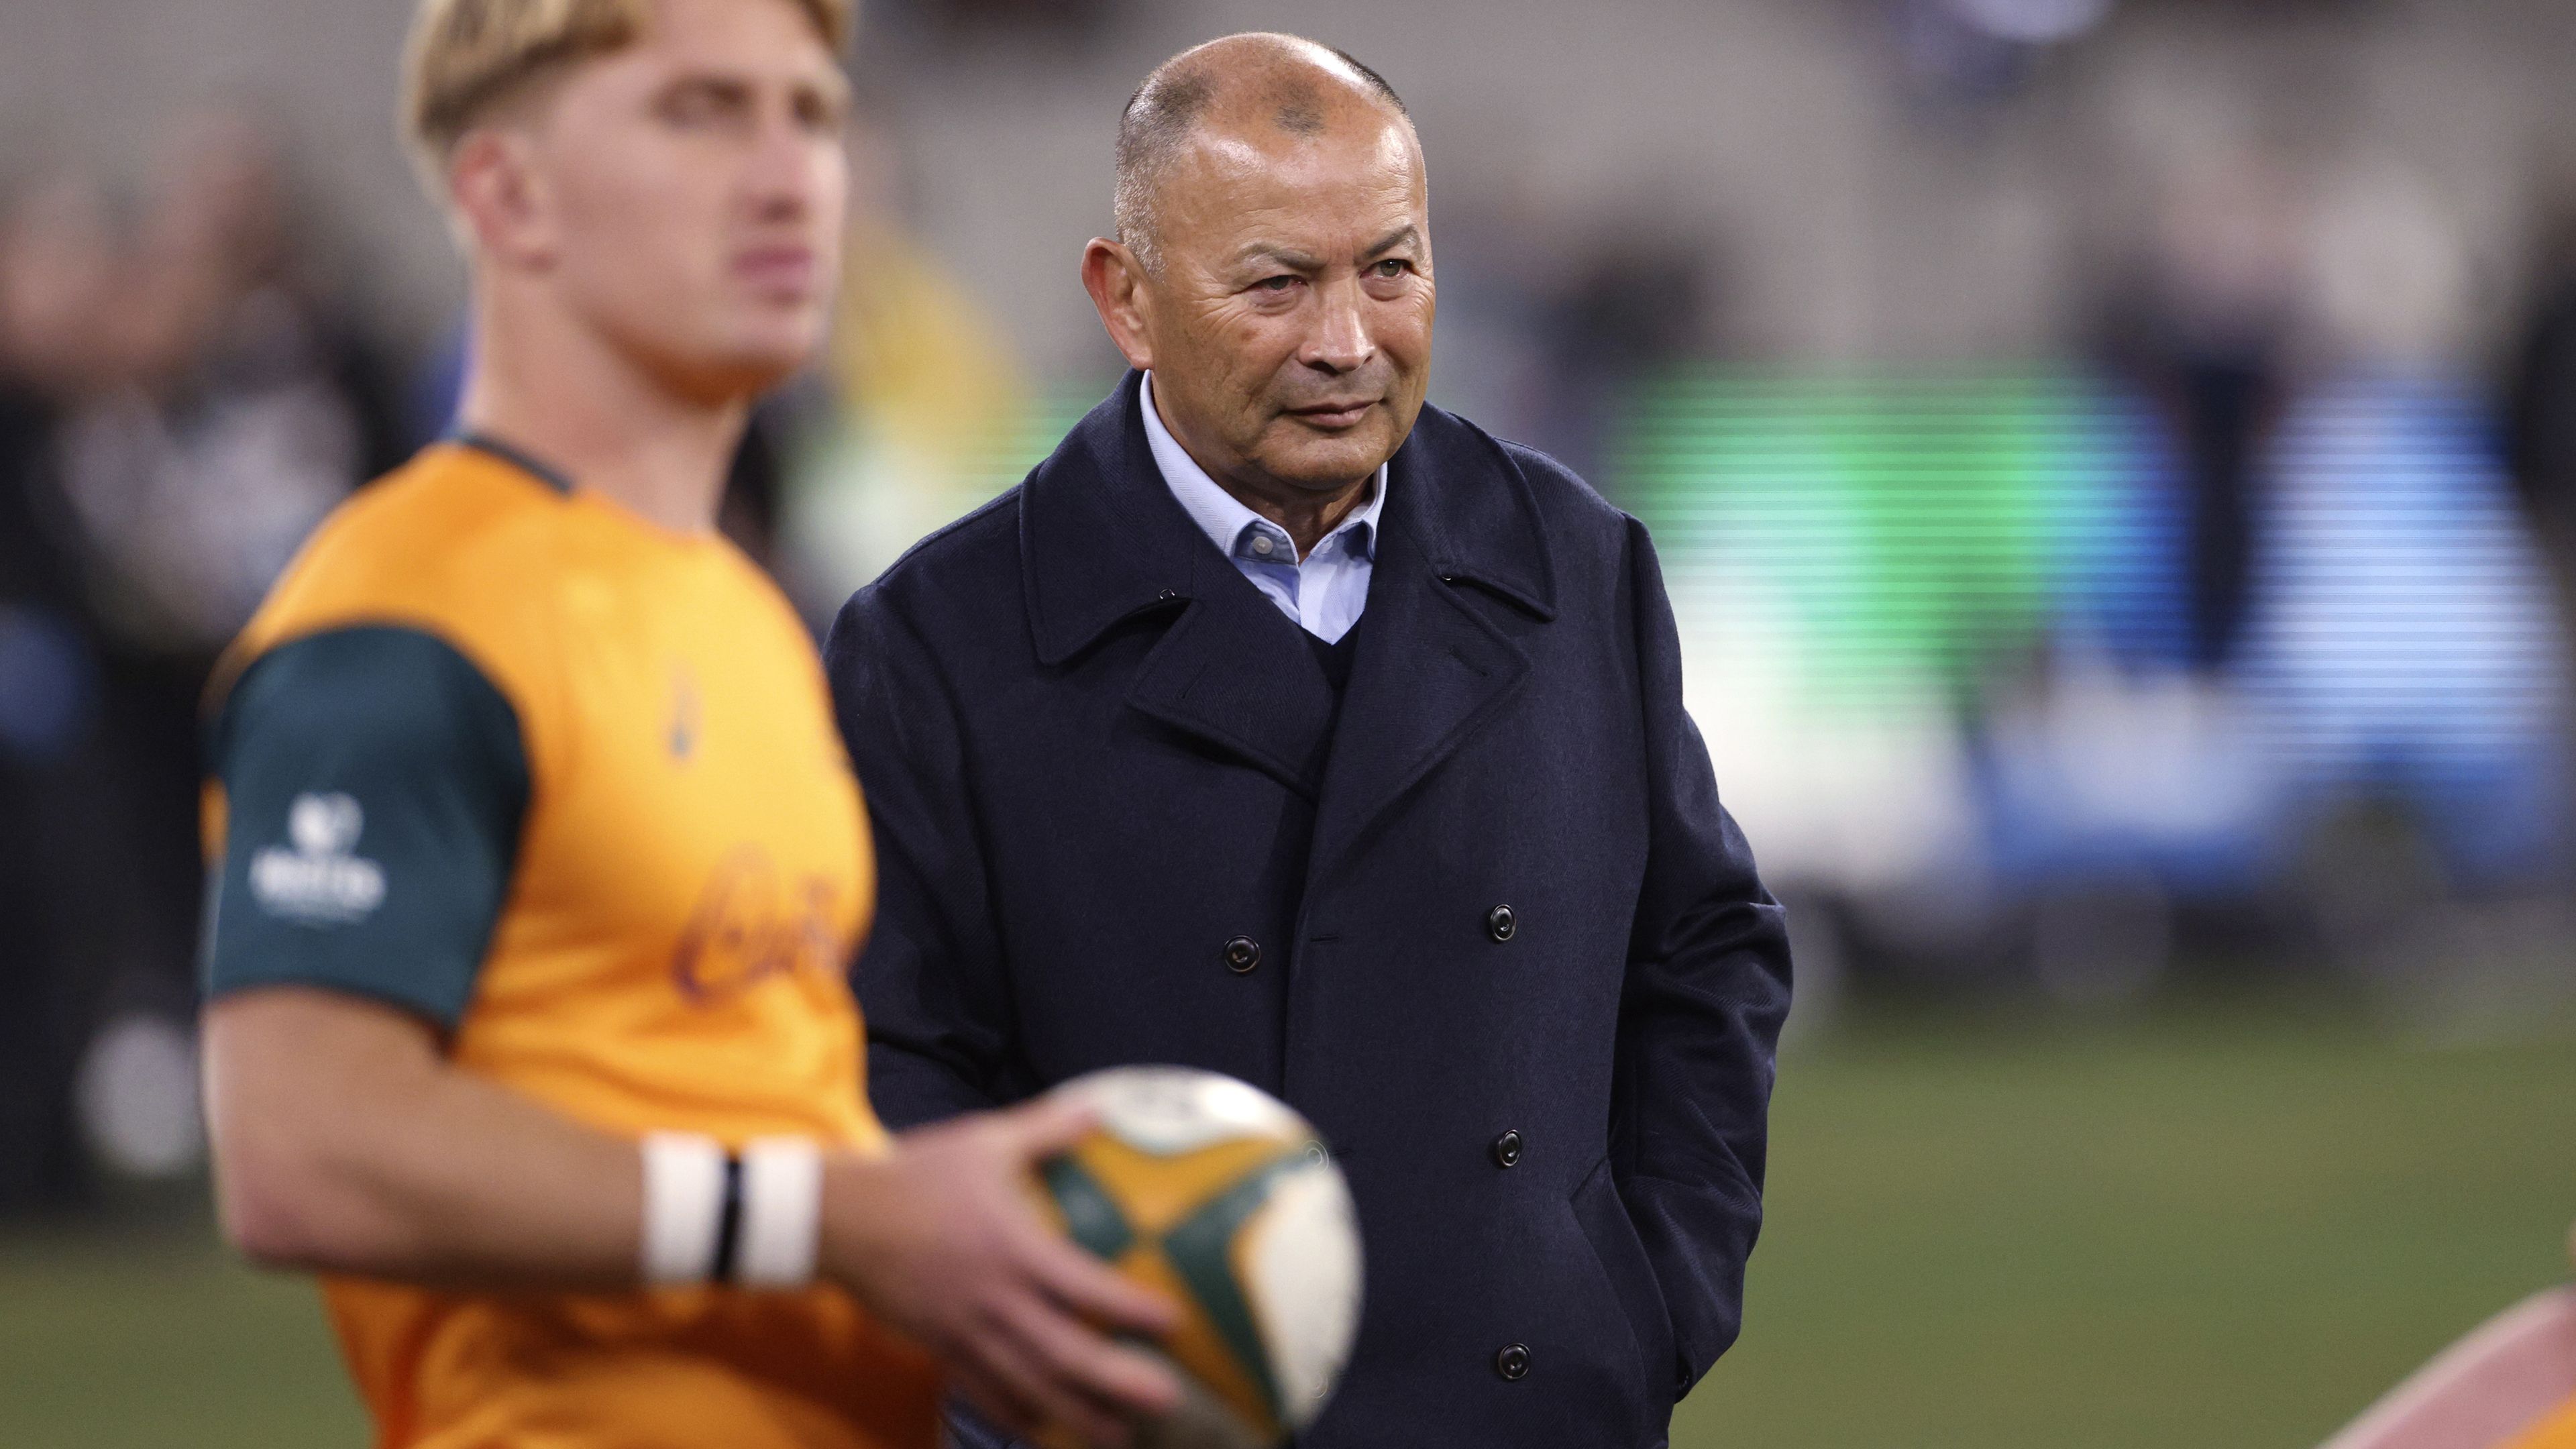 'Self-centred' Eddie Jones whacked by former England player after Wallabies horrorshow